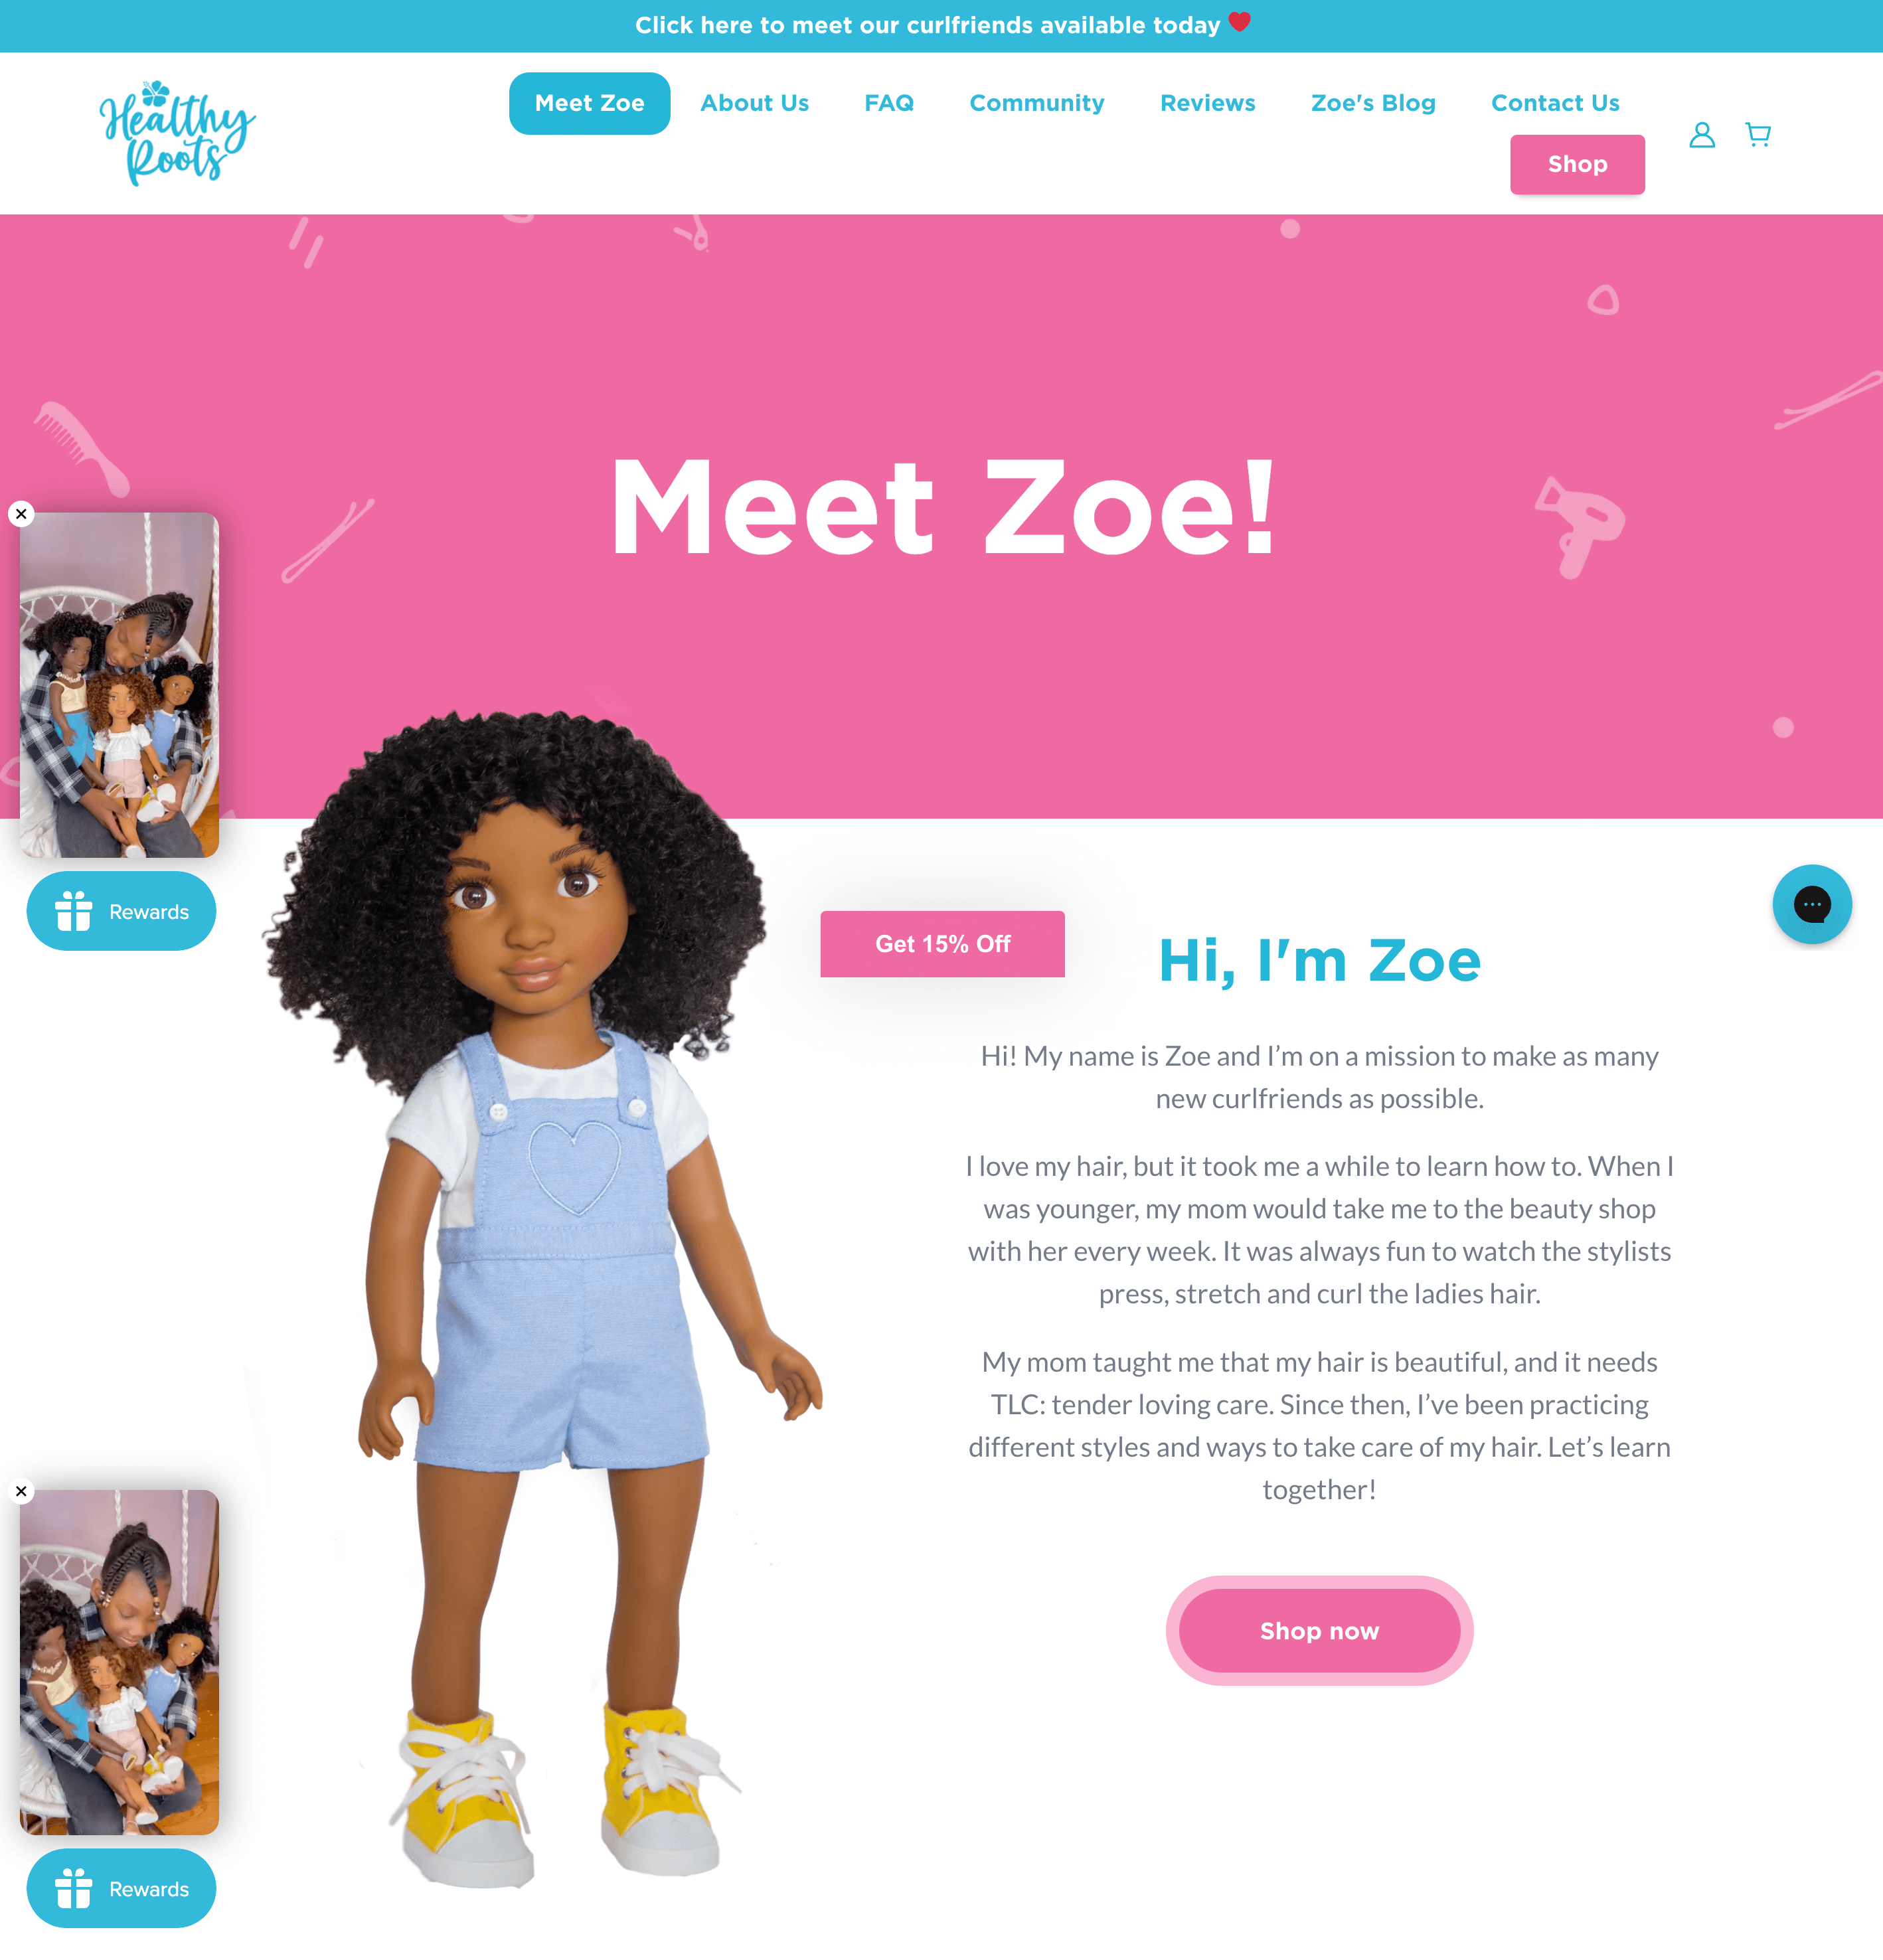 Women Ecommerce Entrepreneurs–A screenshot from Healthy Roots Dolls’ website introducing their doll. There is a title that says “Meet Zoe” and a doll with curly, coiled hear, wearing blue overalls. There is a video on the left-hand side of the page with a Black girl holding 3 of her dolls, and styling their hair.